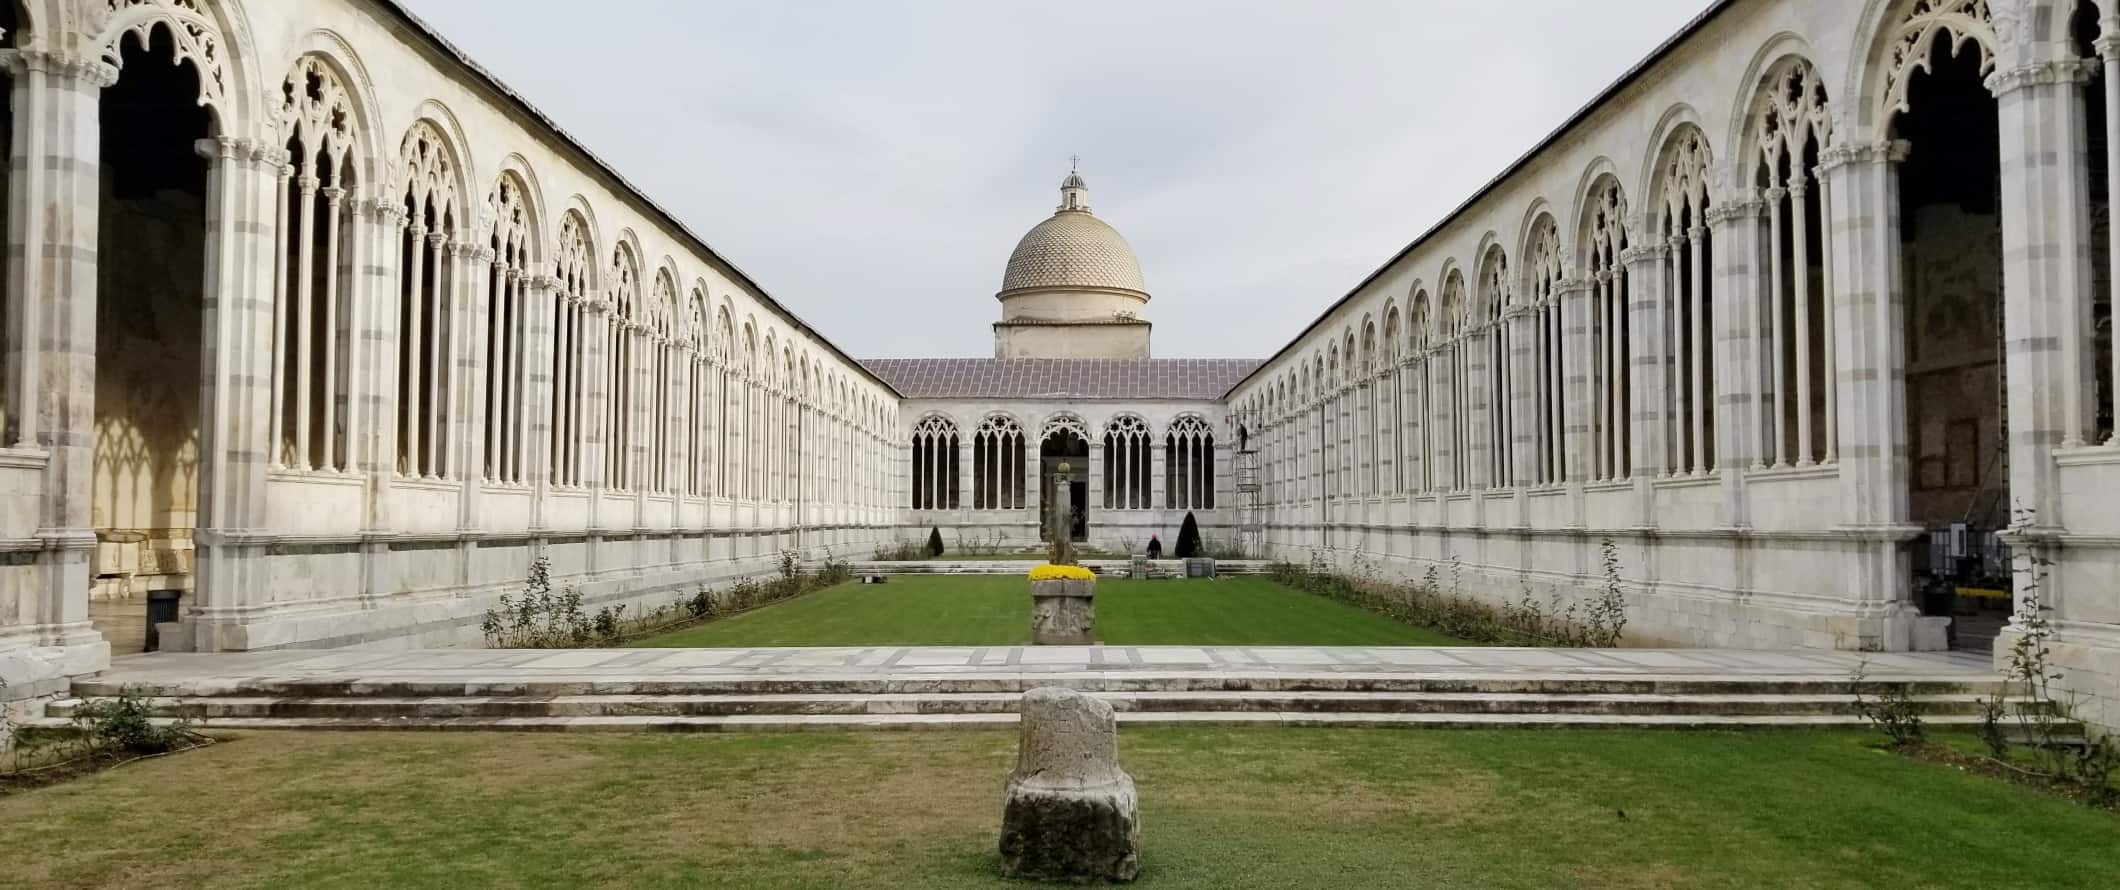 Cloistered quadrangle with dome in the background in Pisa, italy